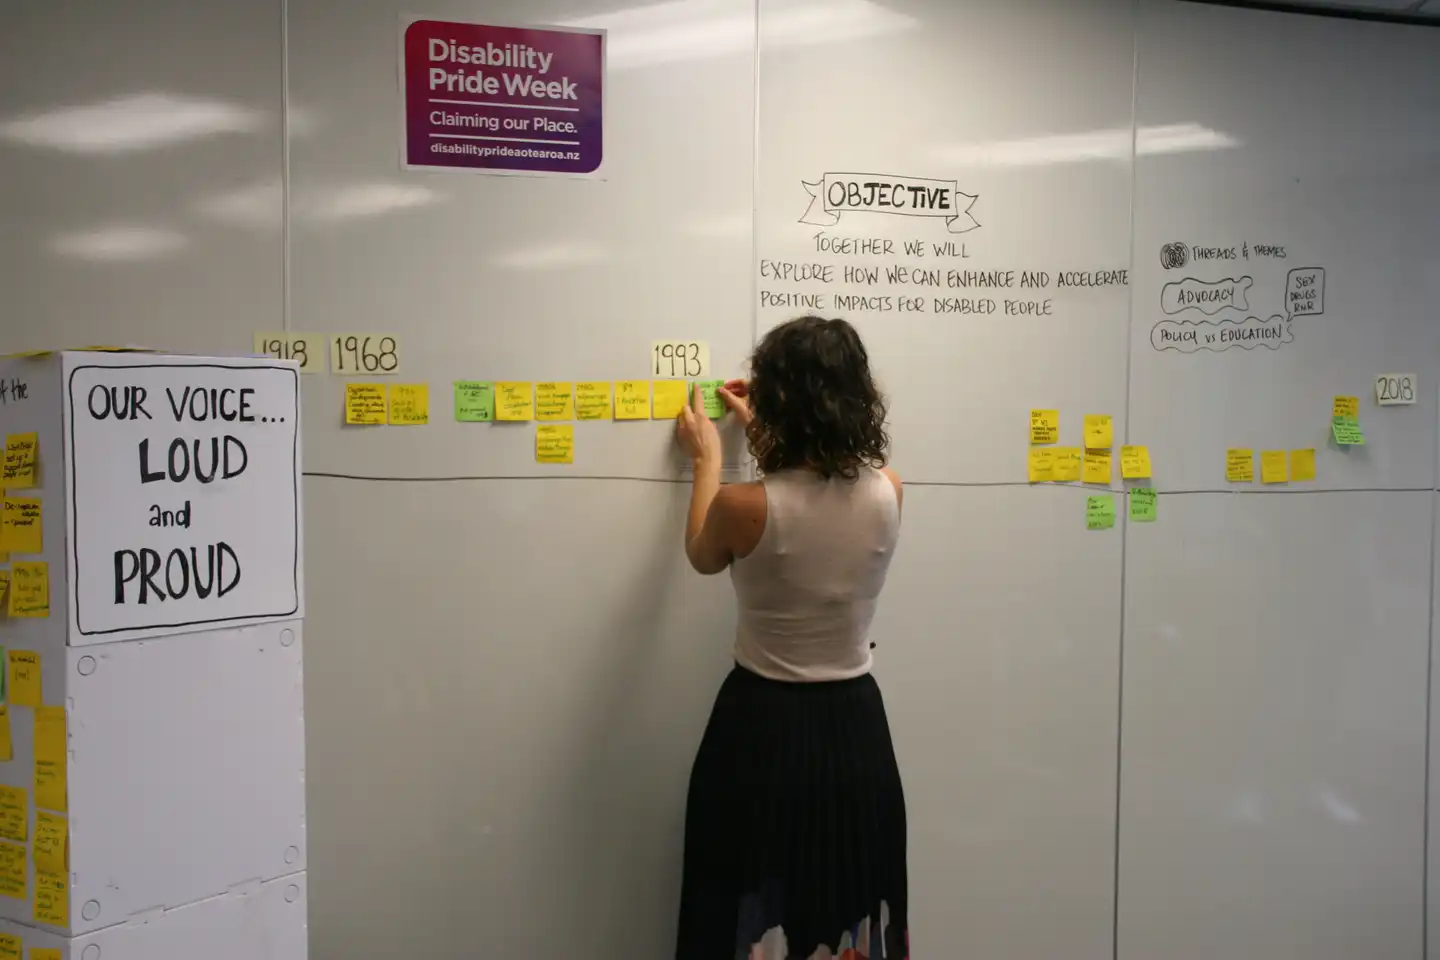 An image of someone working on a whiteboard for Disability Pride Week